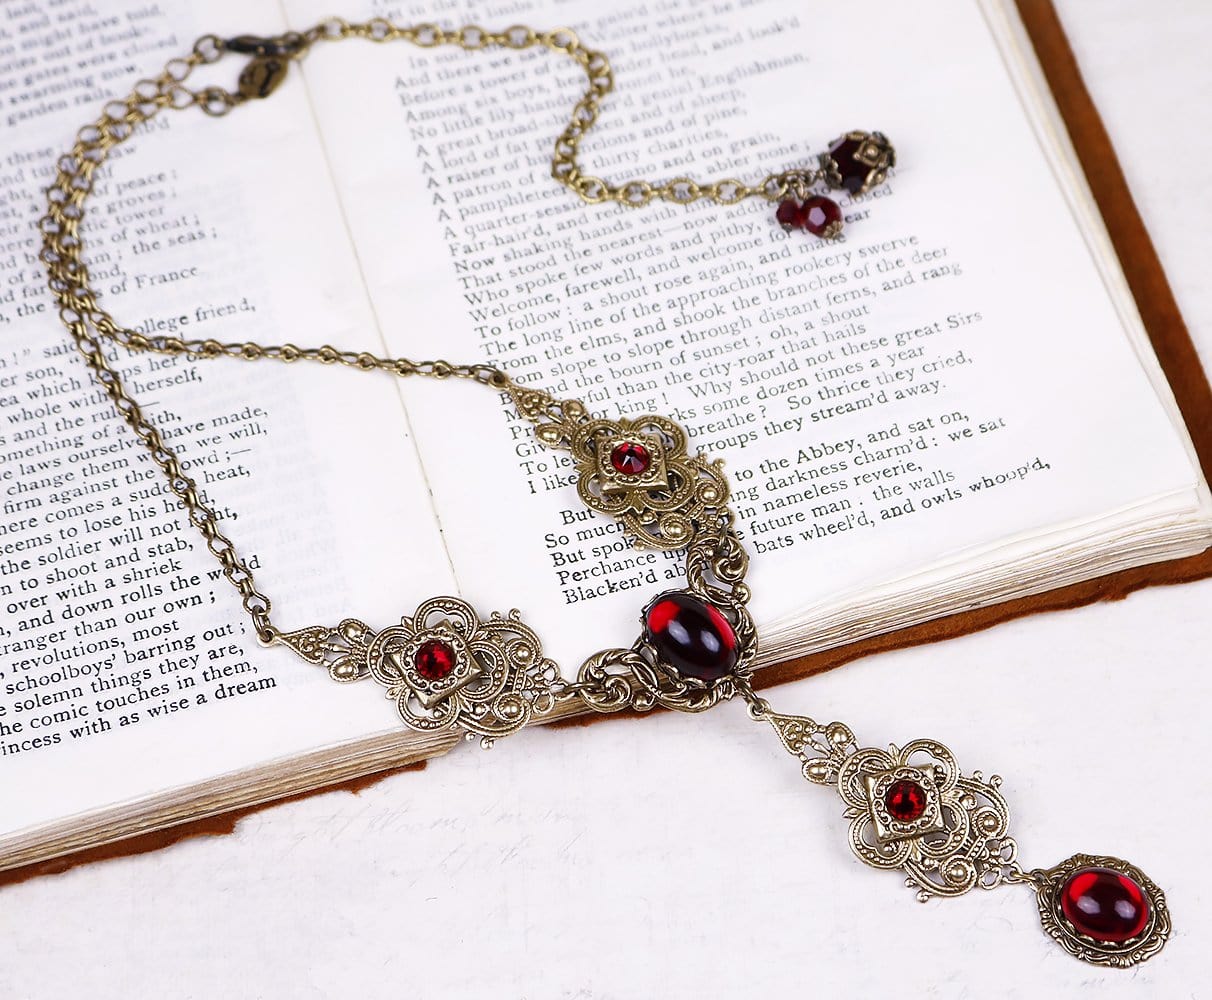 Avalon Ornate Necklace in Garnet and Antiqued Brass by Rabbitwood & Reason